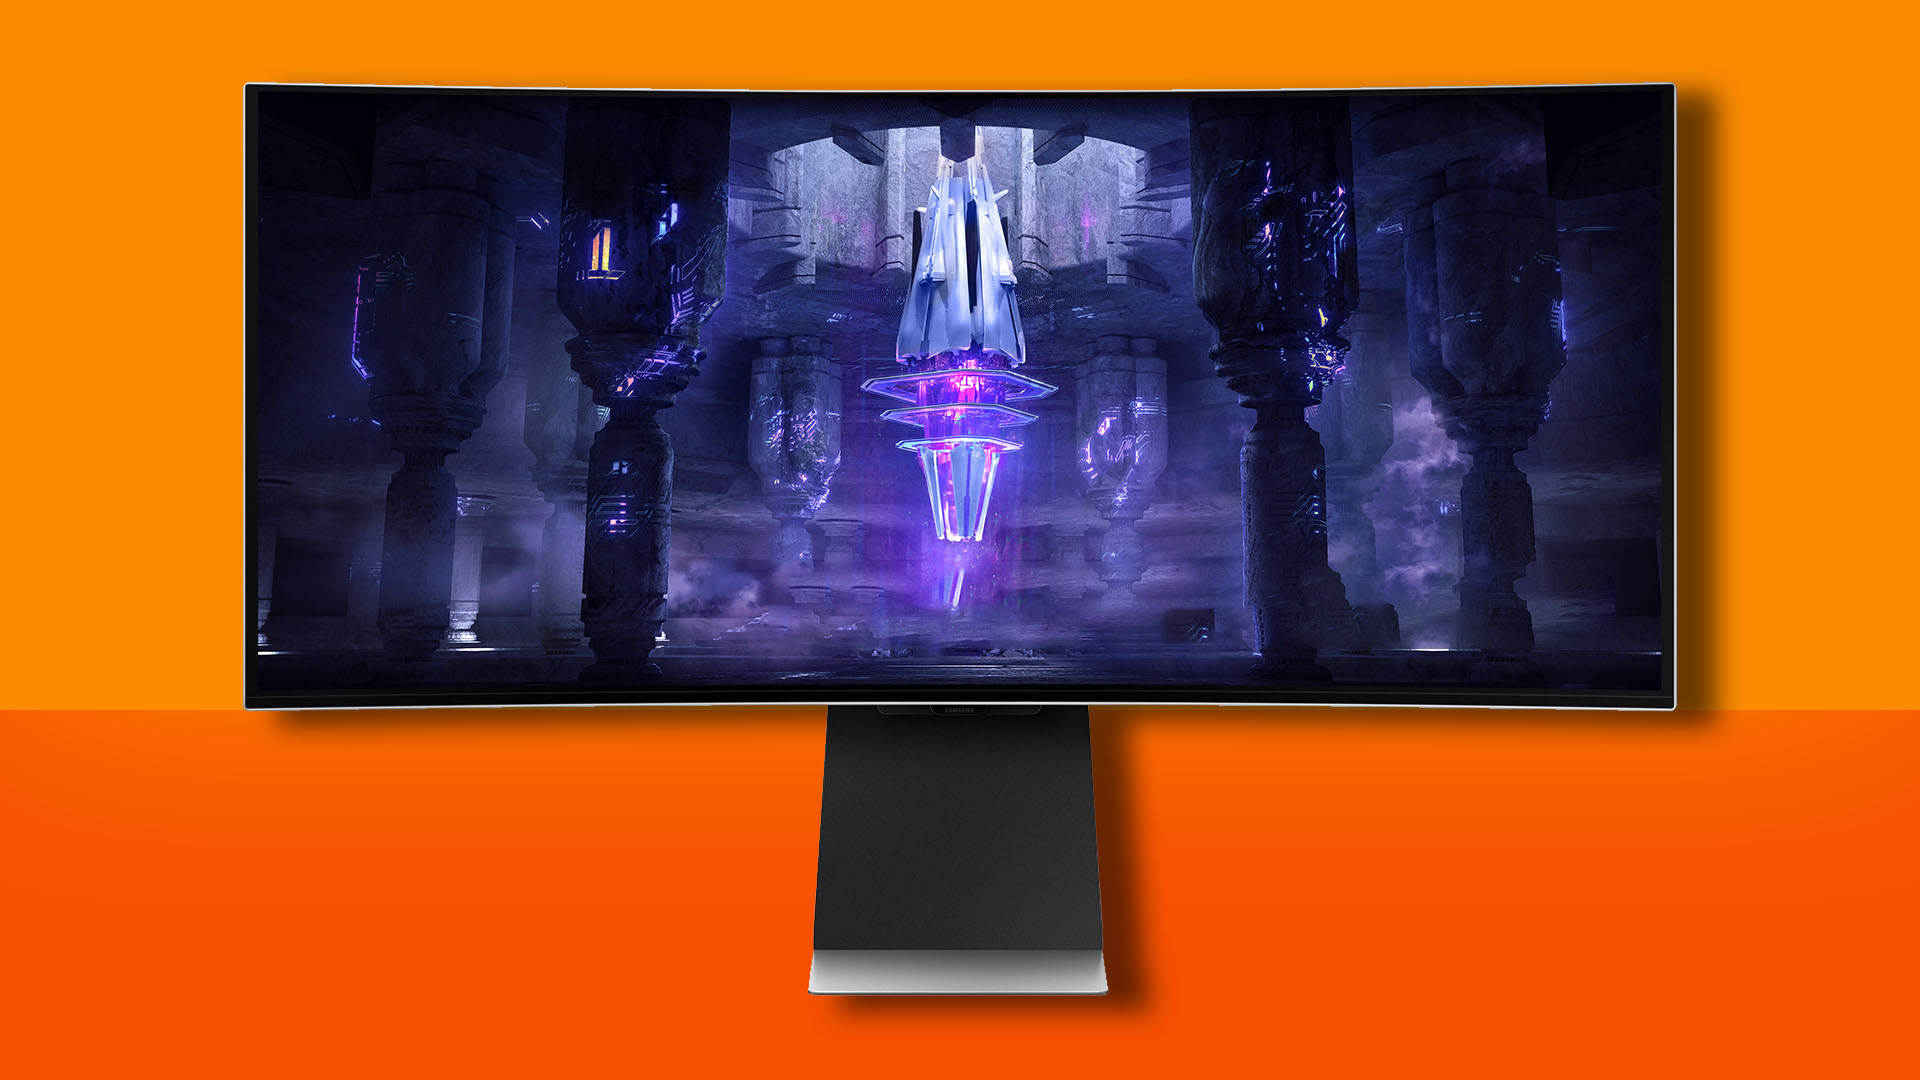 It's official, now is the time to buy an OLED gaming monitor